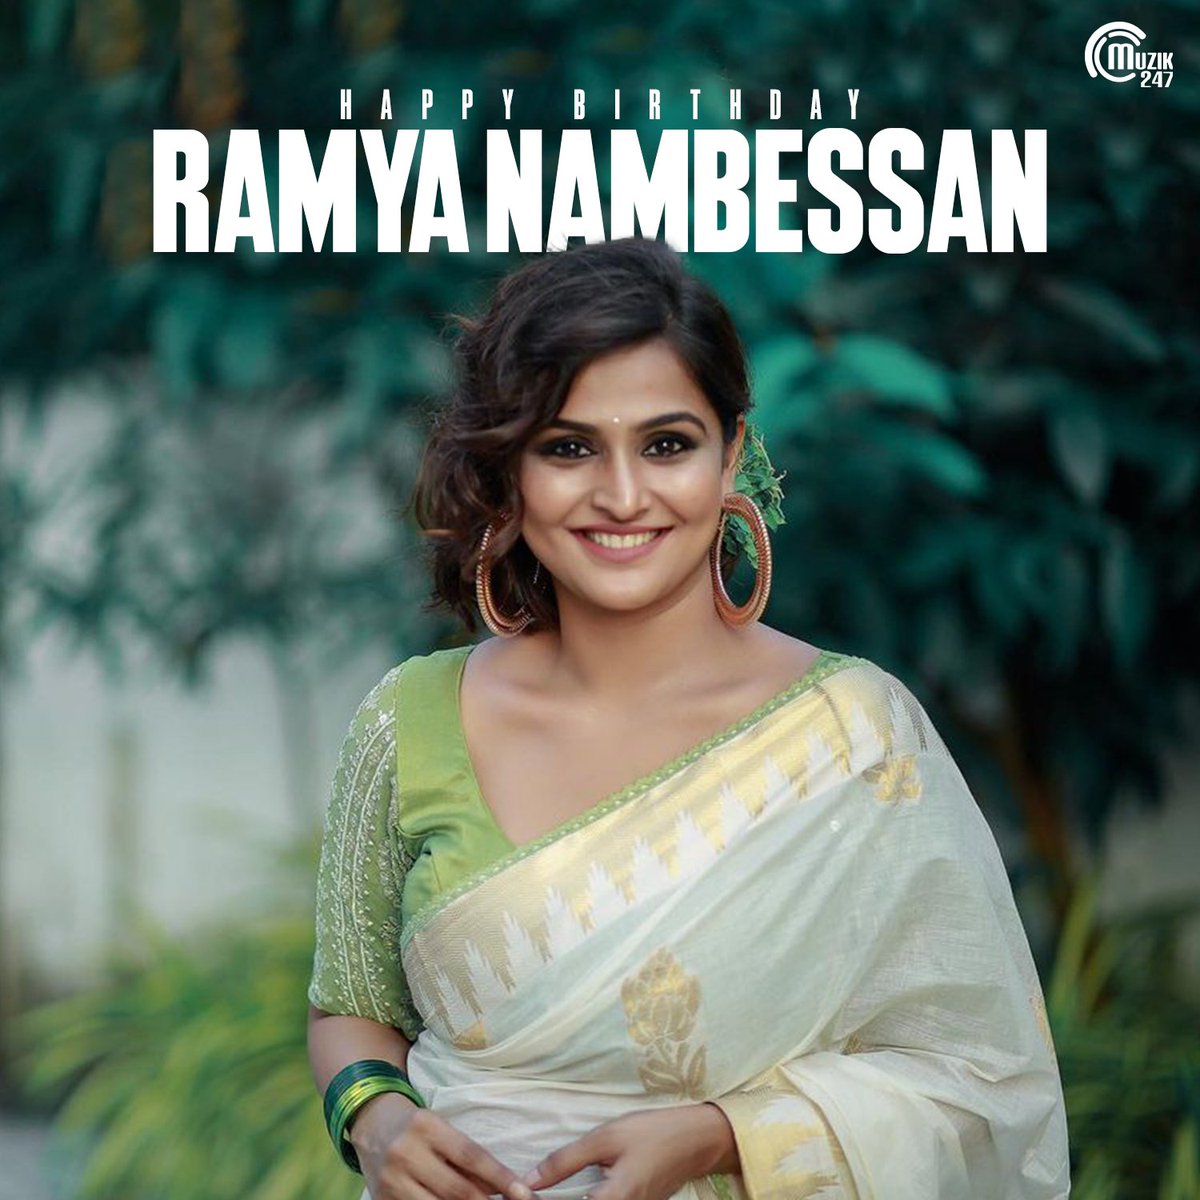 Wishing the multi-talented @nambessan_ramya a birthday filled with beautiful melodies and unforgettable performances! 🎶🎉 #HBDRamyaNambessan